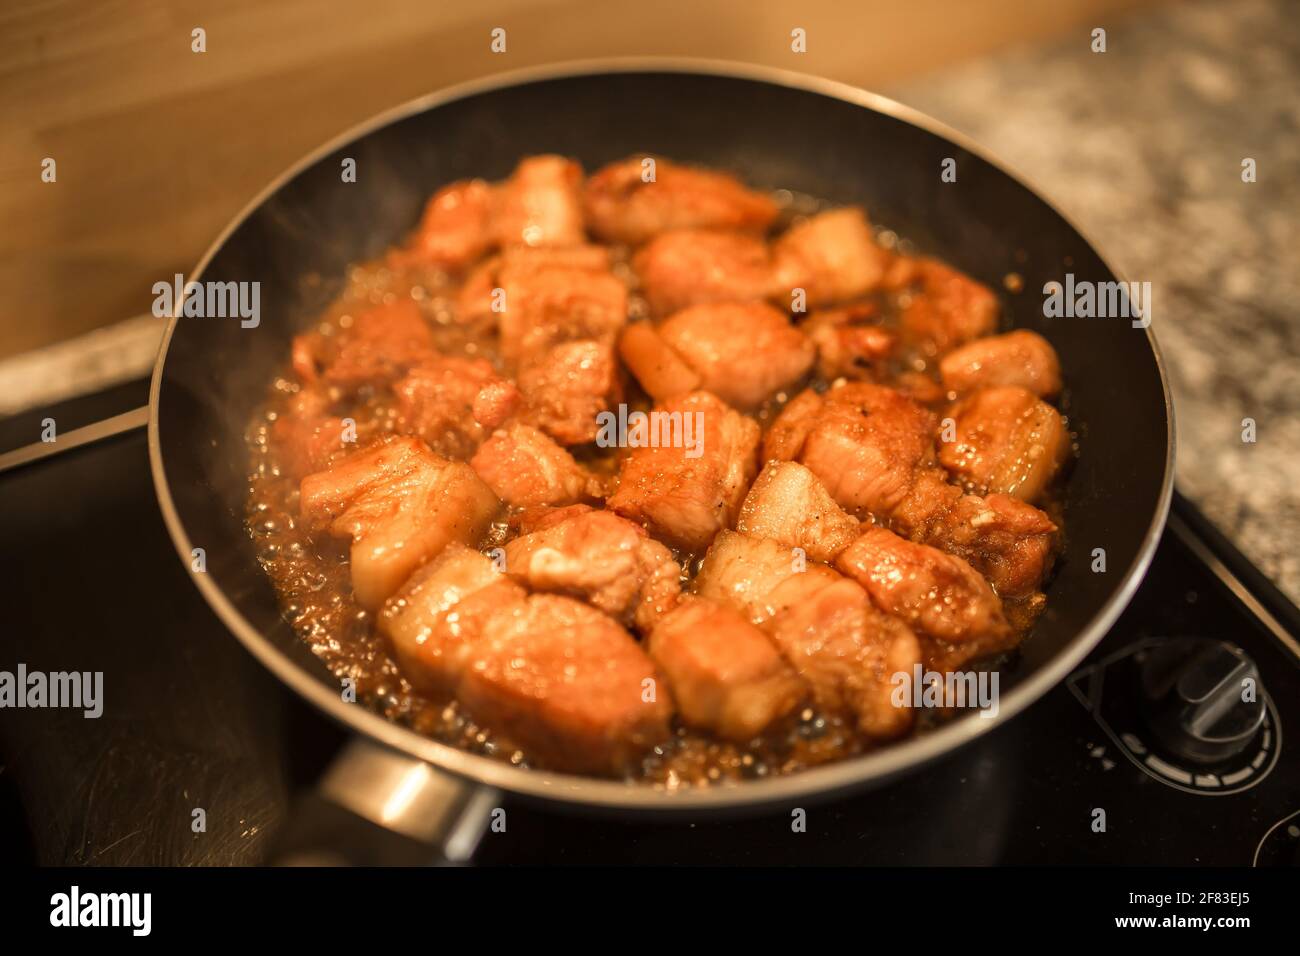 Caramelized pork cooking in a pan under the yellow light Stock Photo